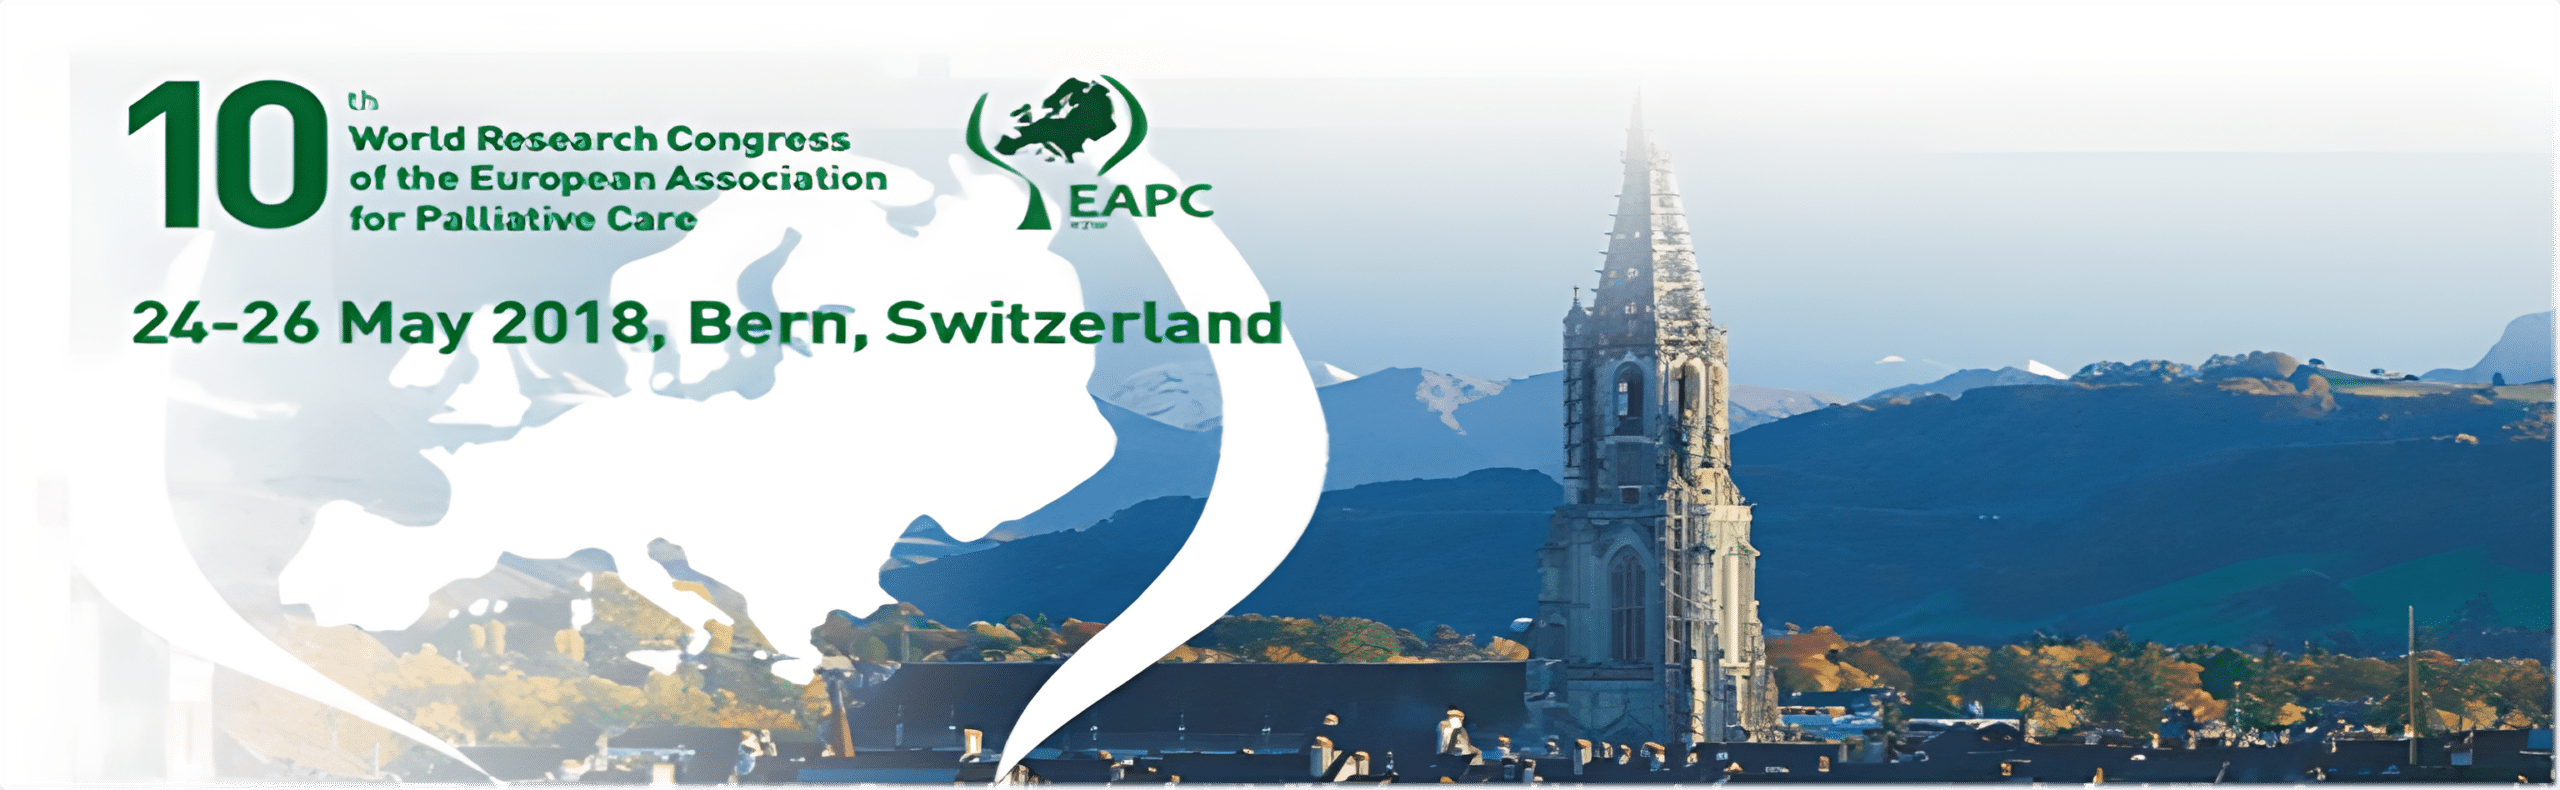 banner 10th world research congress of the EAPC 24-26 May 2018 Bern